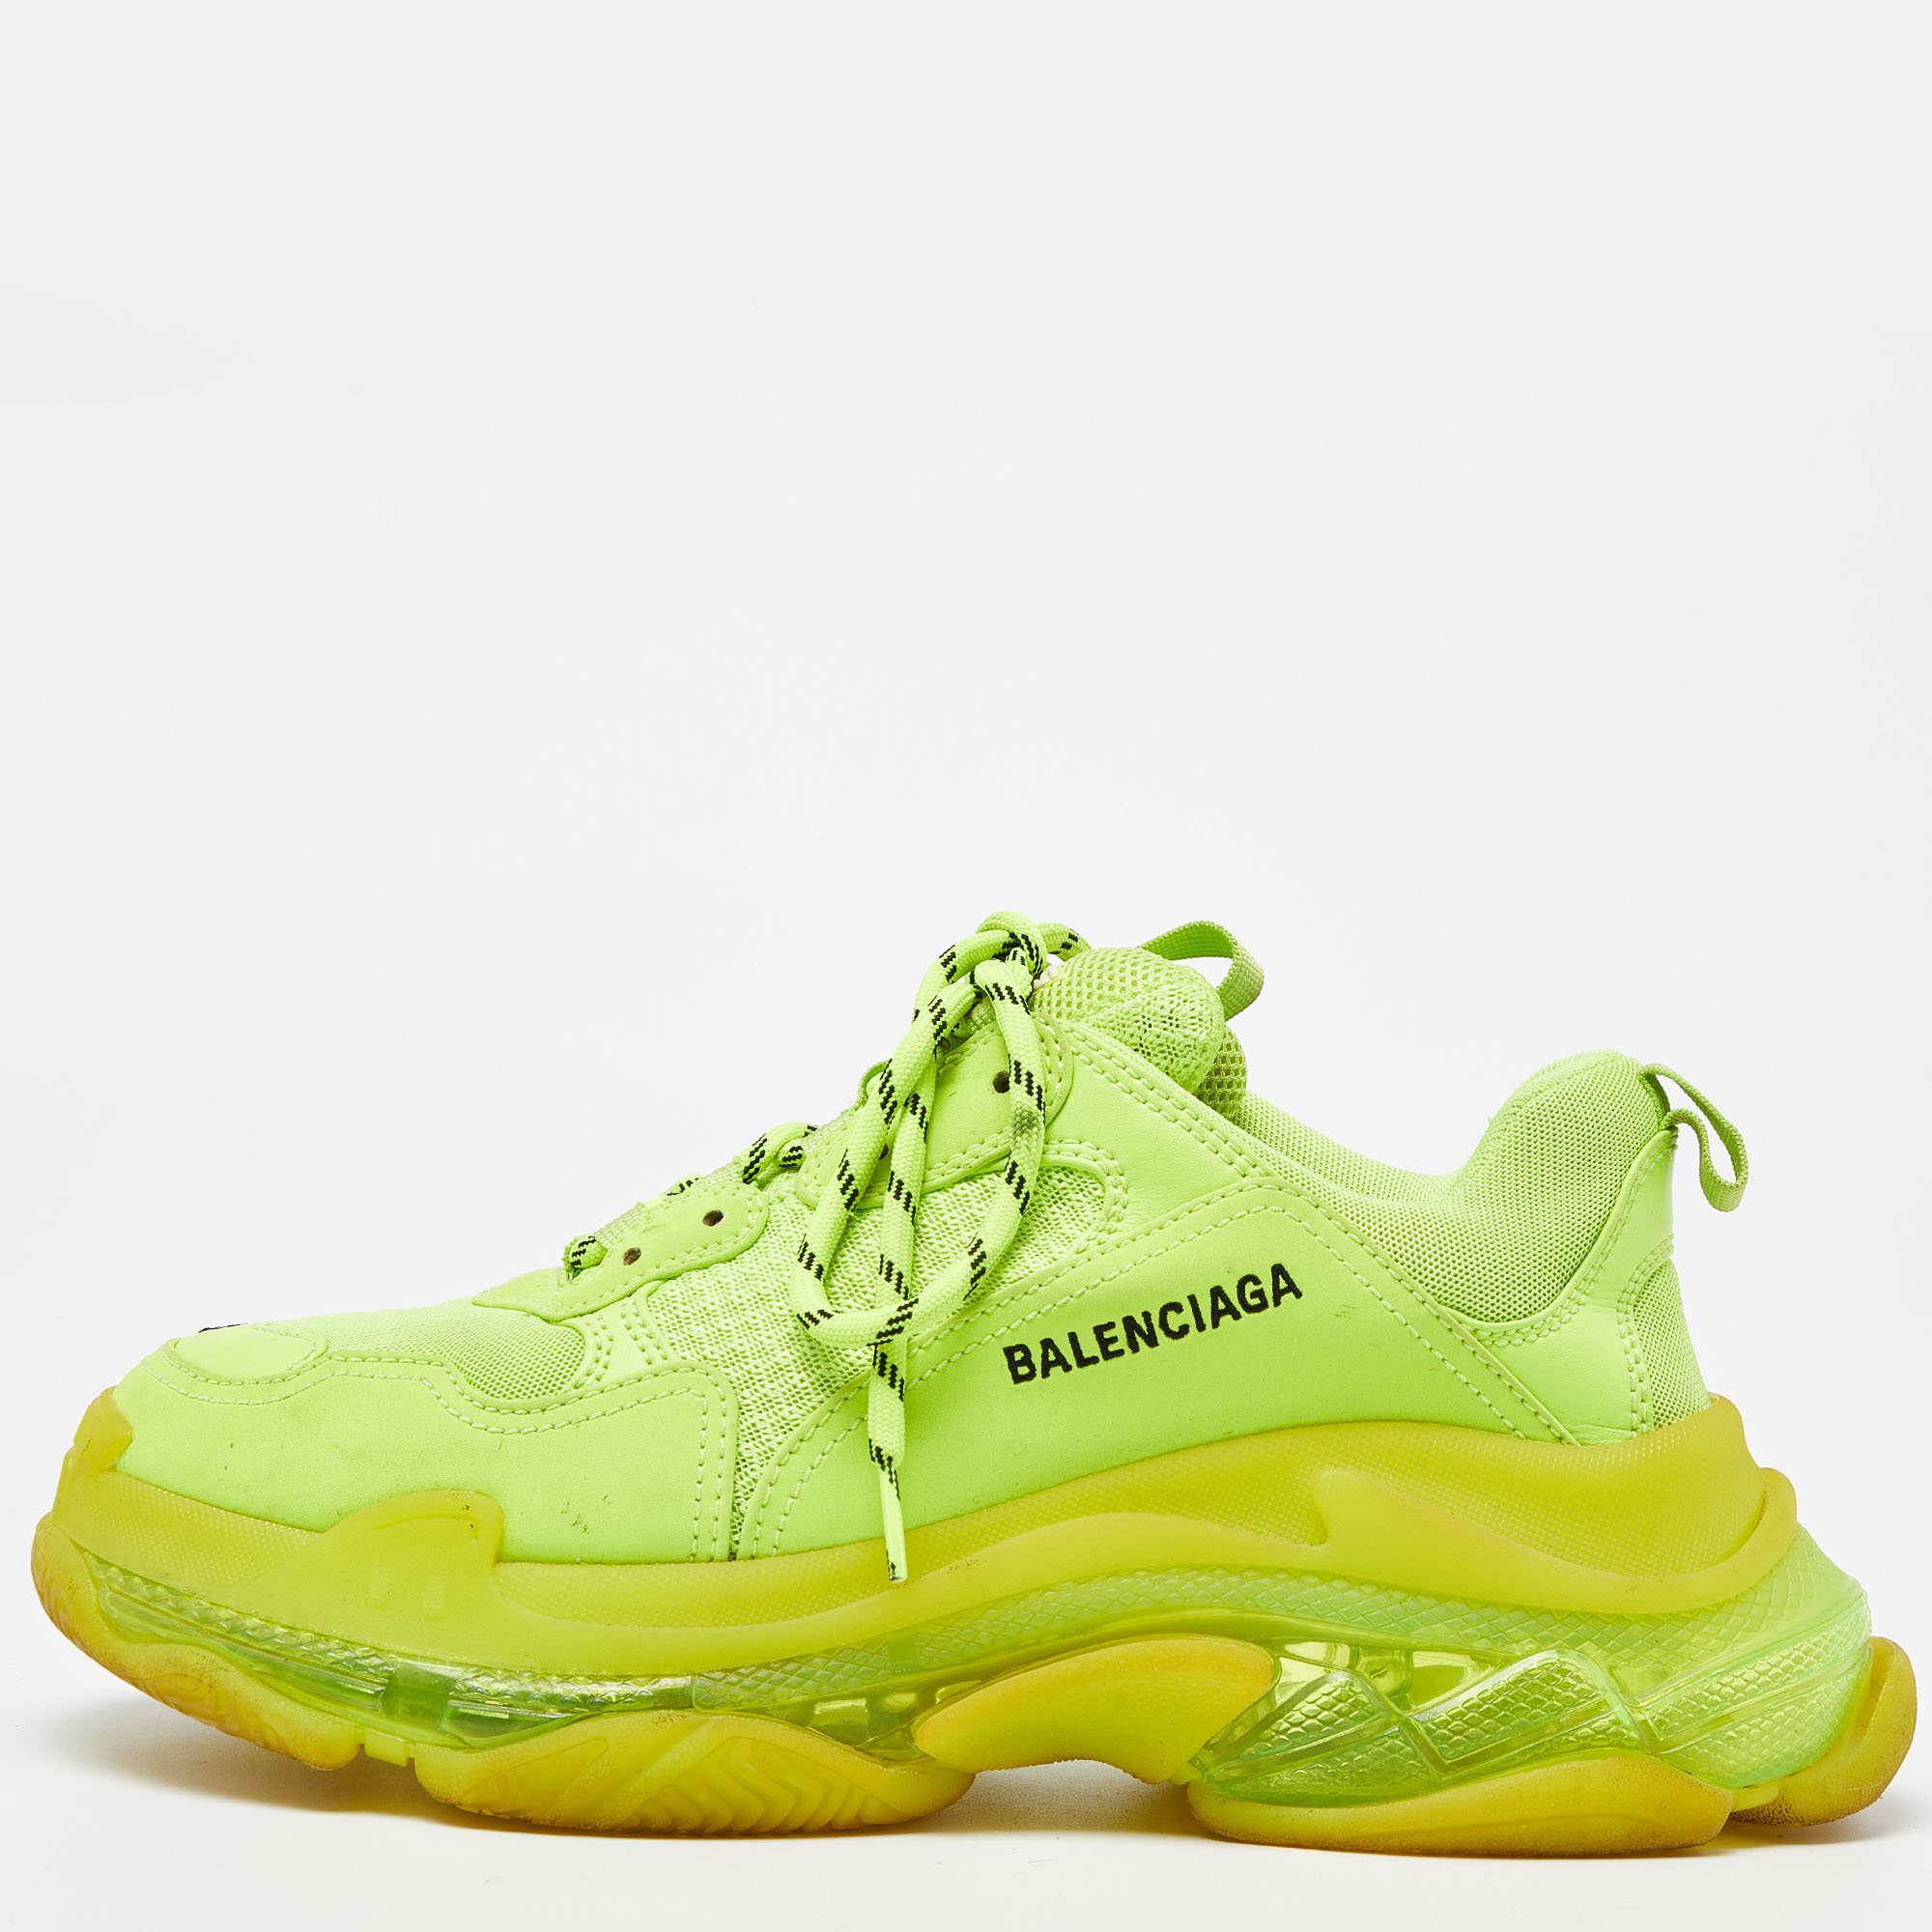 Balenciaga neon green faux leather and mesh triple s clear sole low top sneakers size 42